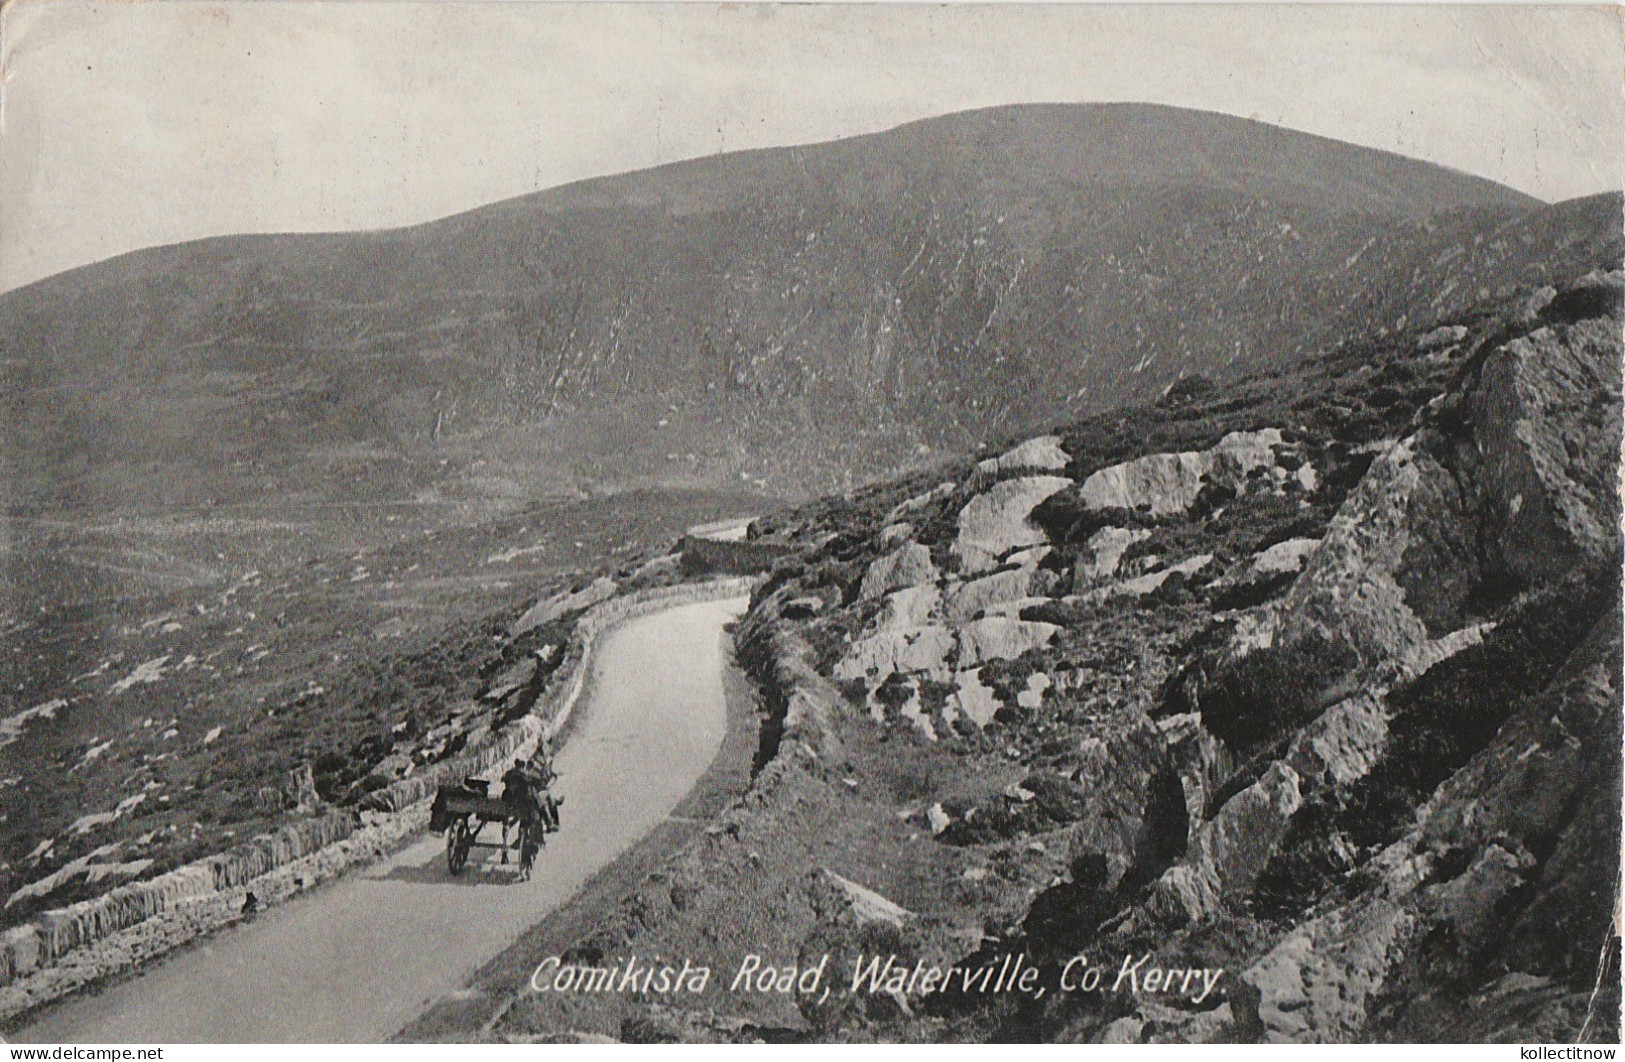 COMIKISTA ROAD - WATERVILLE - COUNTY KERRY - Antrim